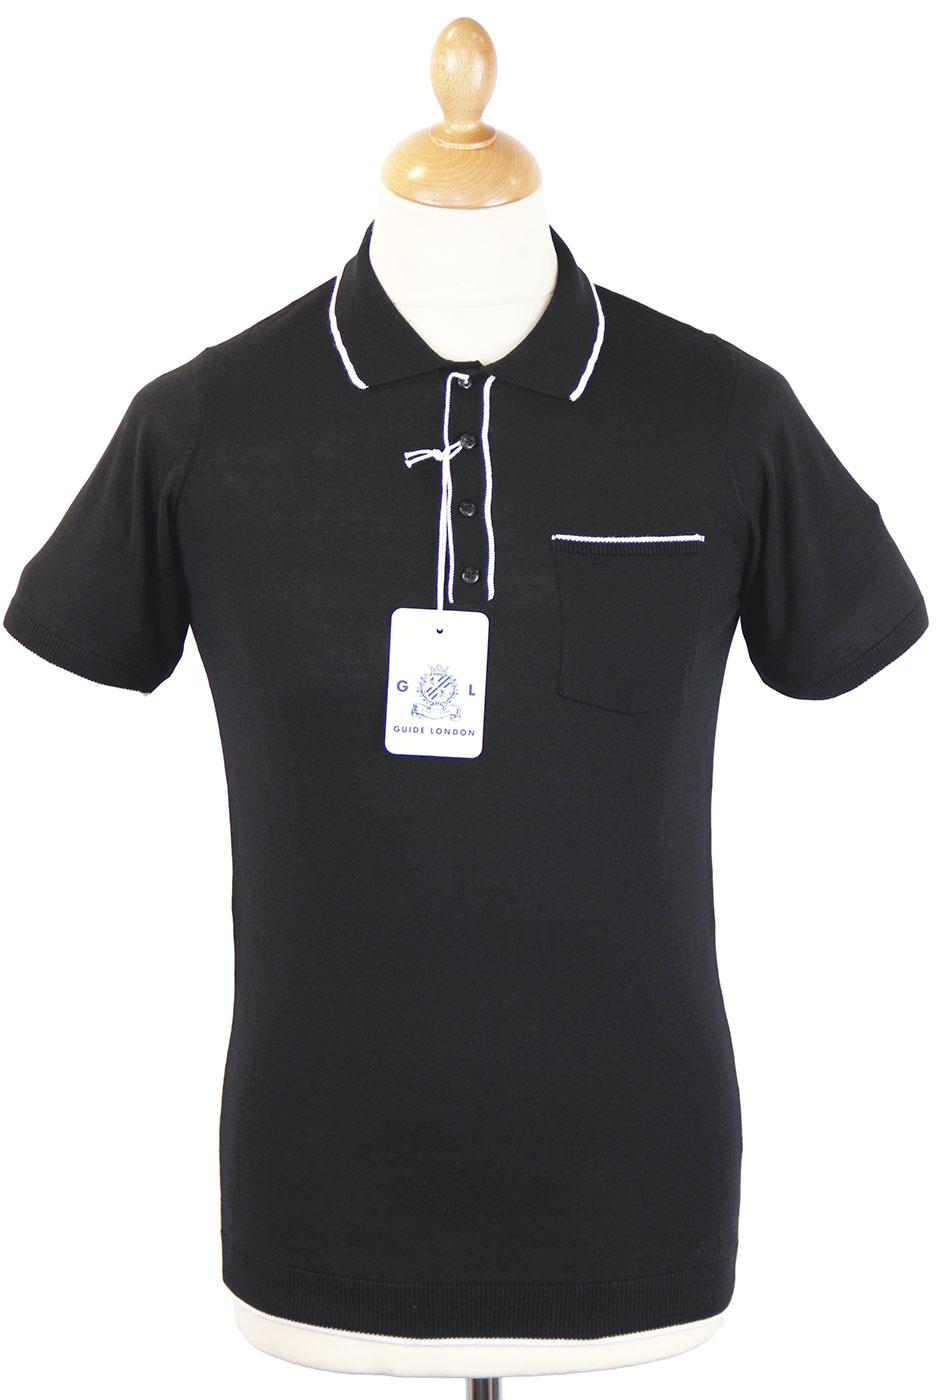 GUIDE LONDON Retro 60s Knitted Mod Tipped Polo (B)